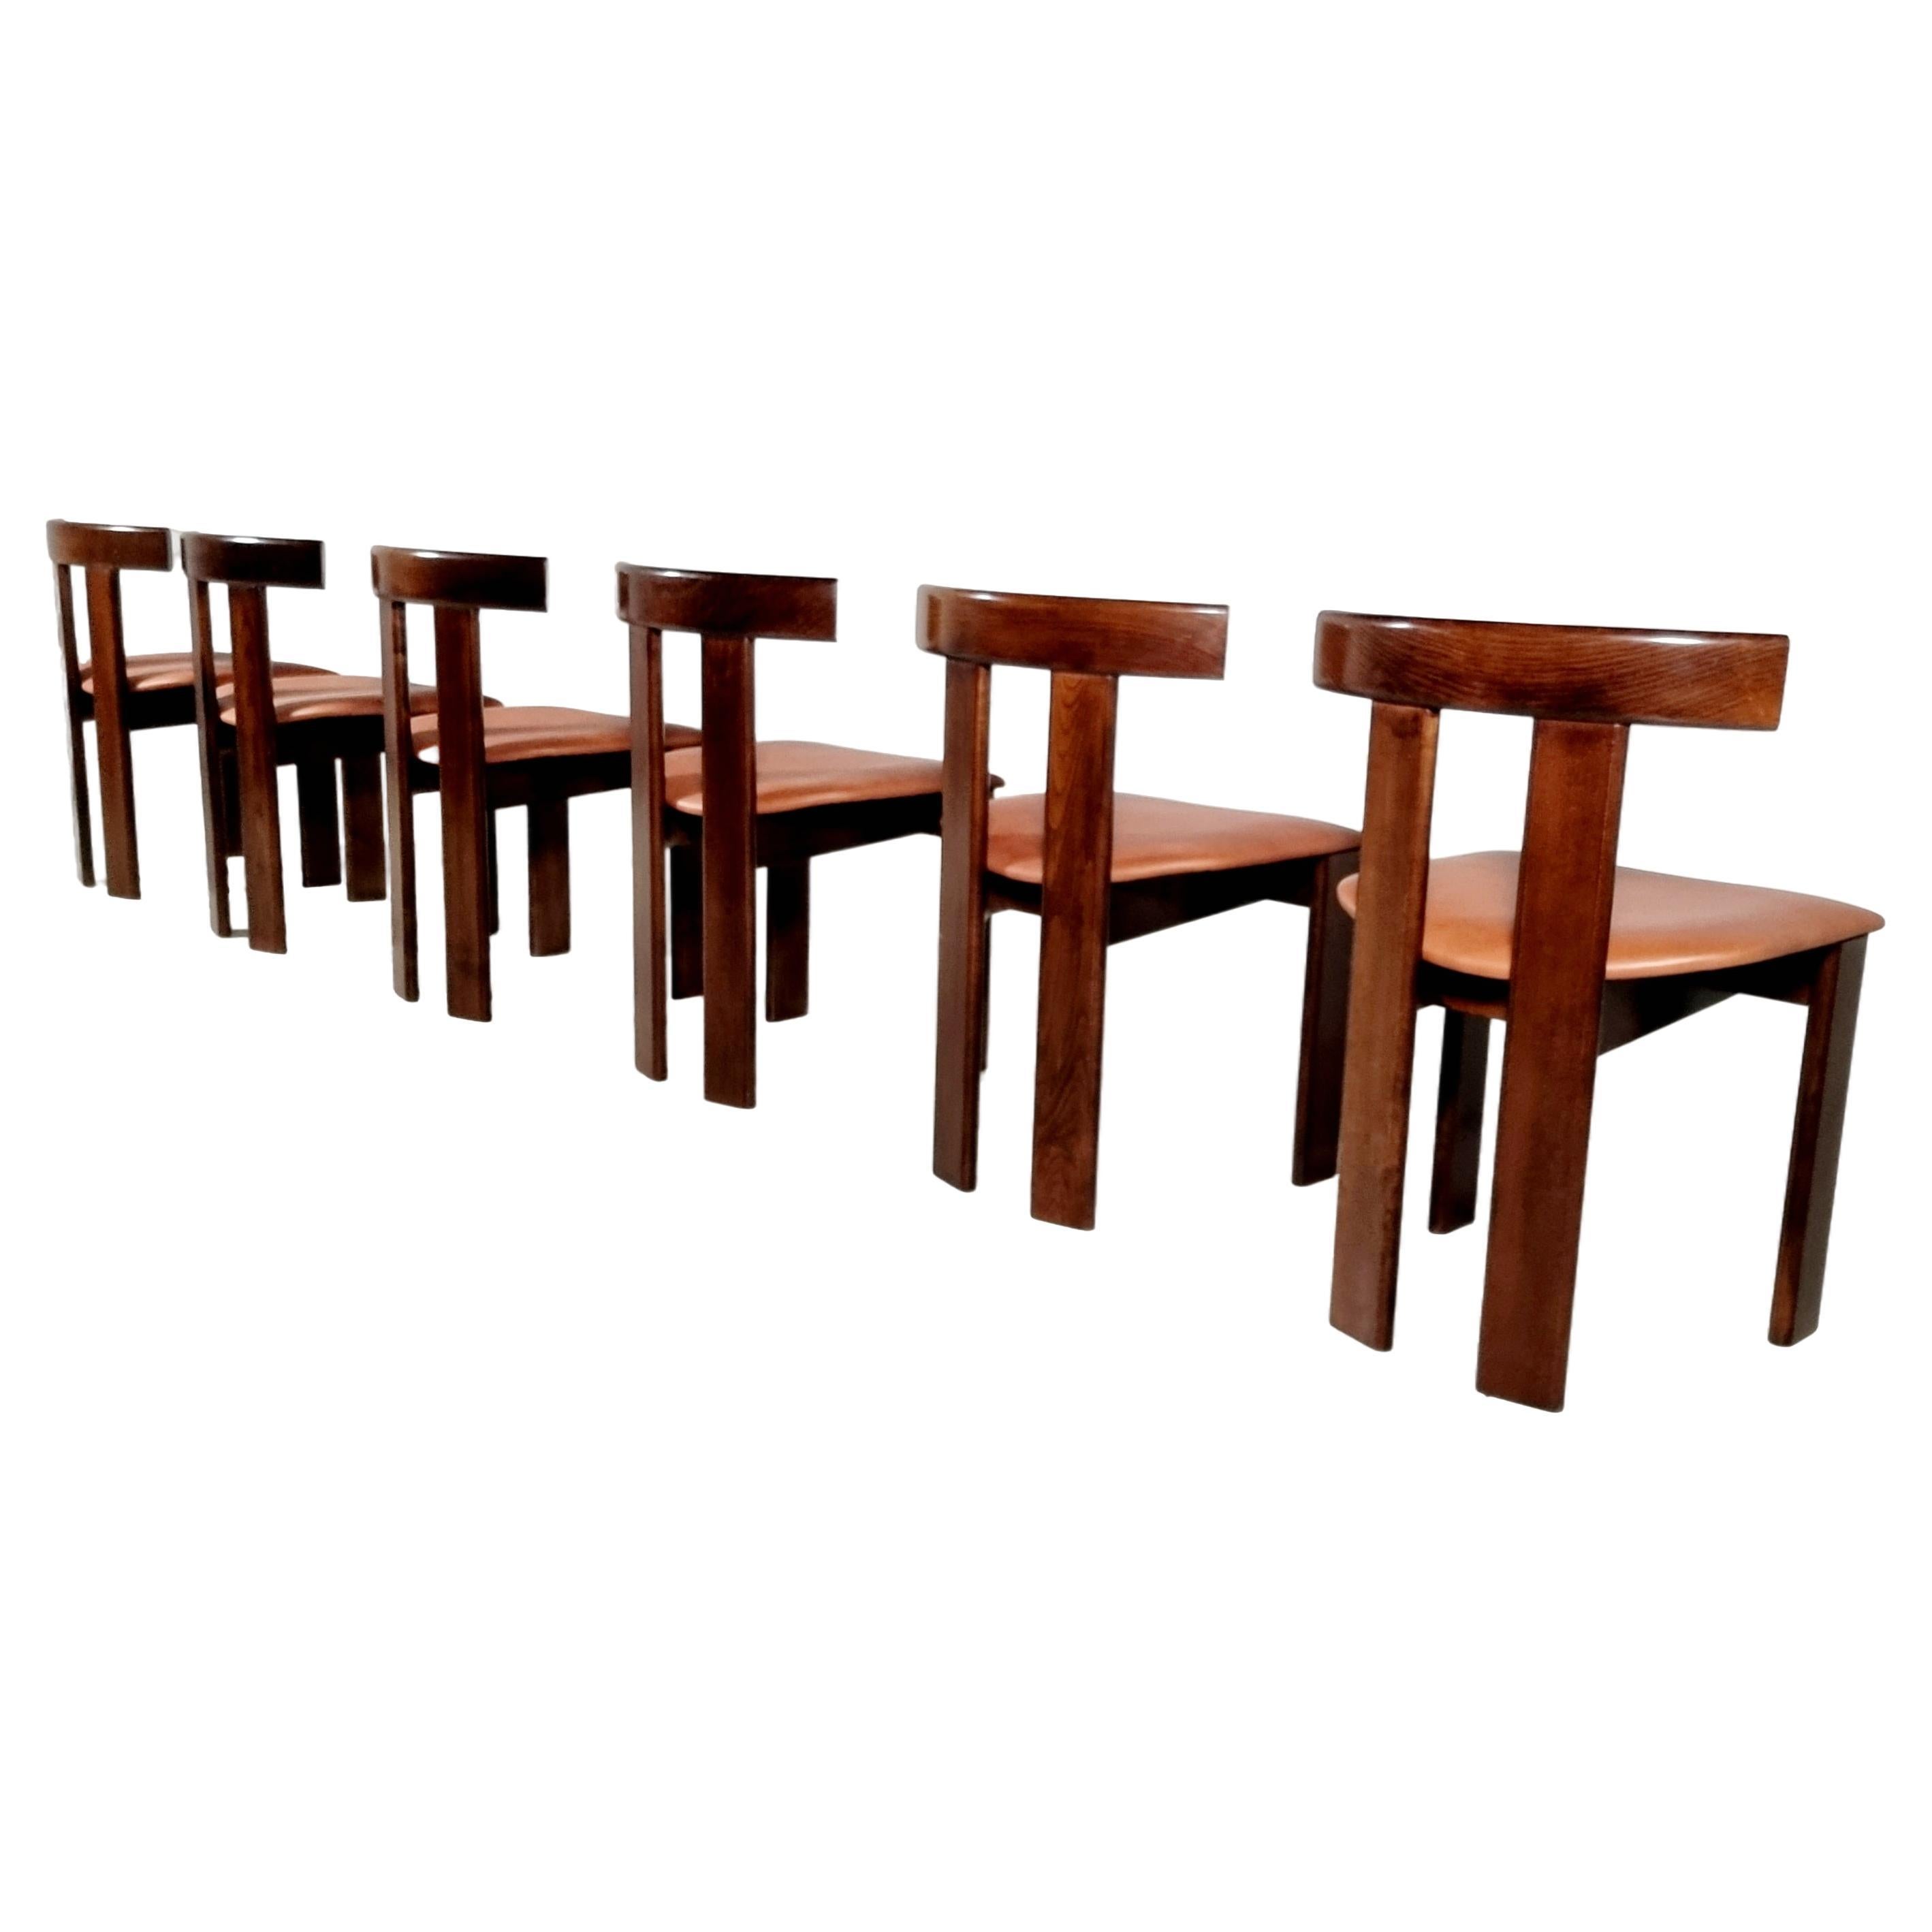 Set of 6 Luigi Vaghi dining chairs in ash wood and cognac leather, Italy, 1960